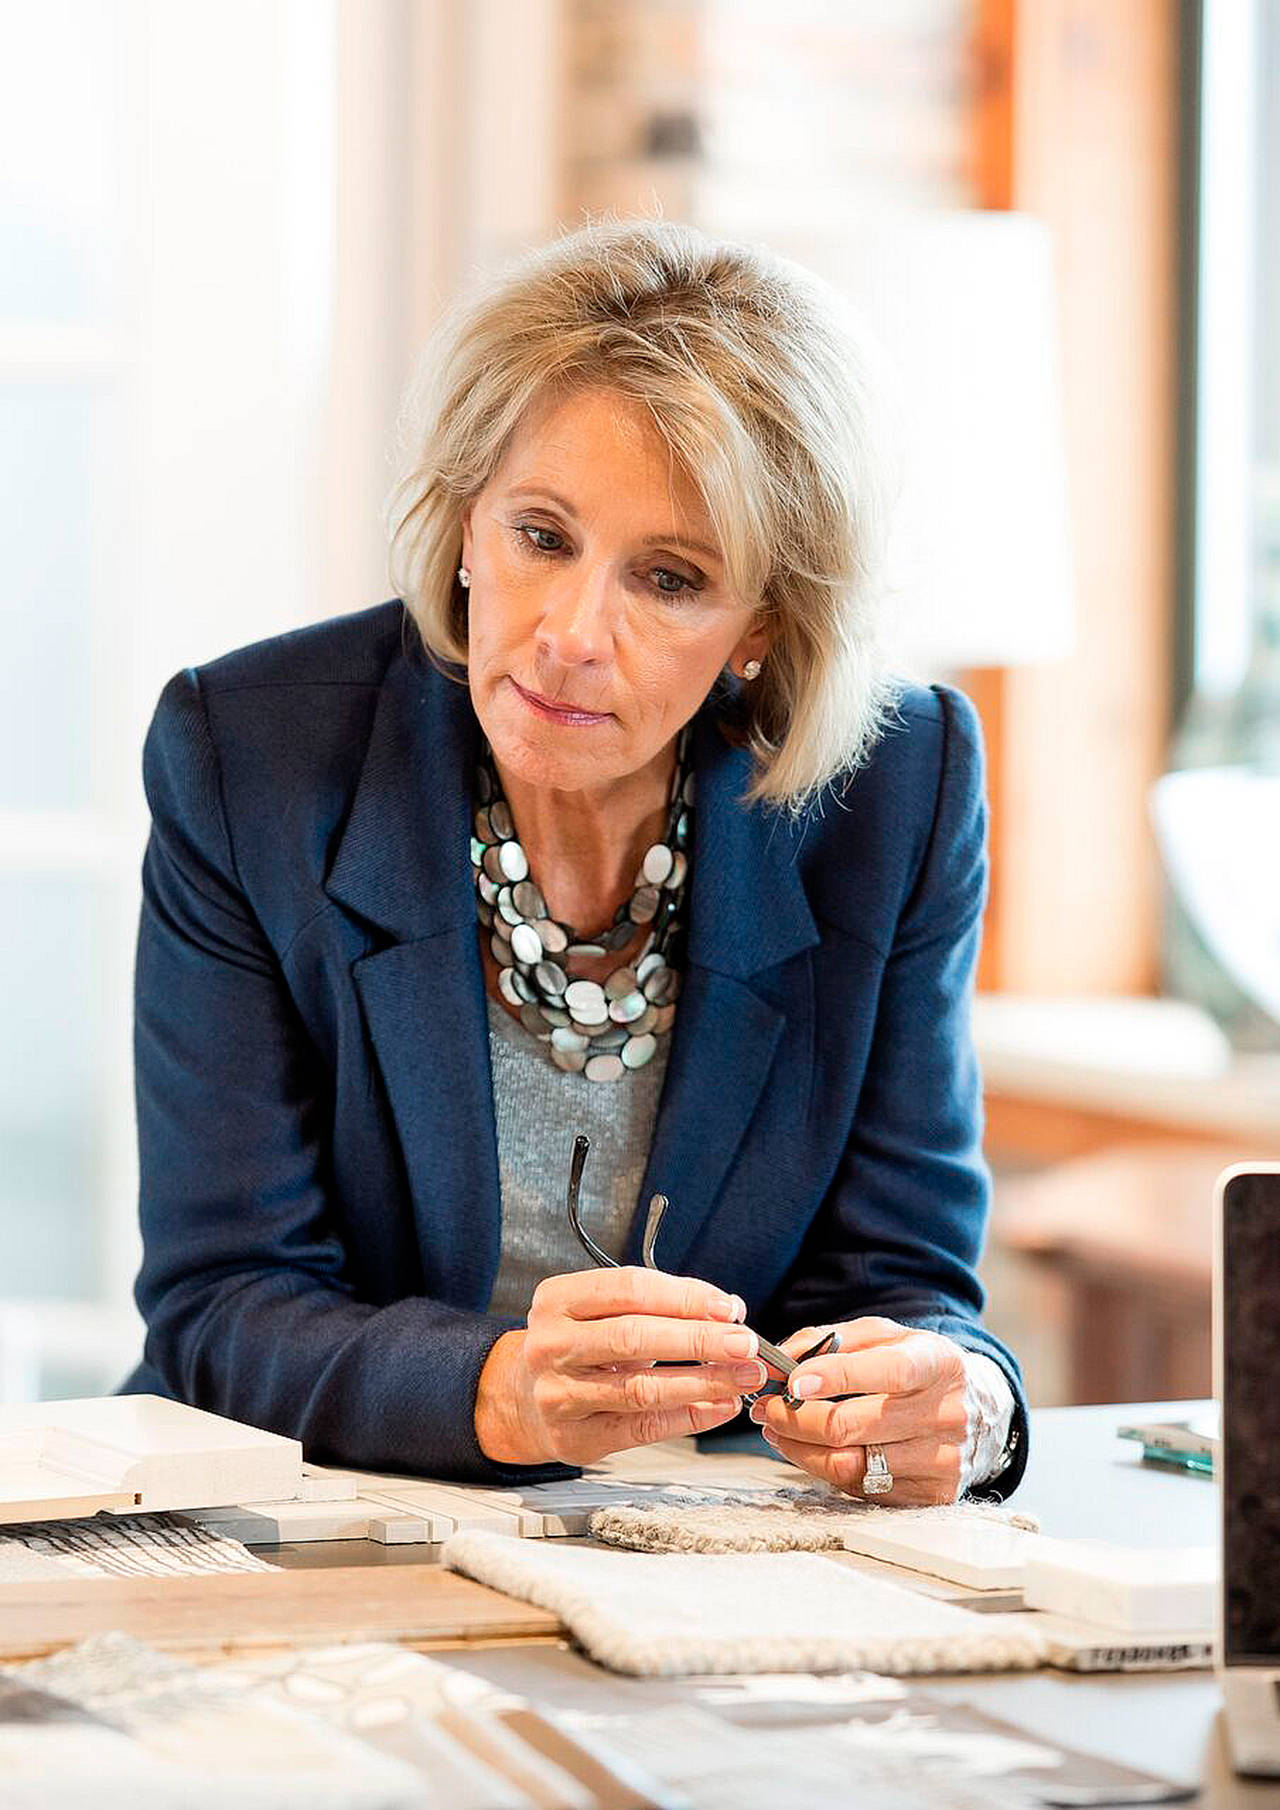 U.S. Secretary of Education Betsy DeVos is planning to speak at the Washington Policy Center’s annual dinner at the Hyatt Regency in Bellevue today. Photo courtesy of betsydevos.com